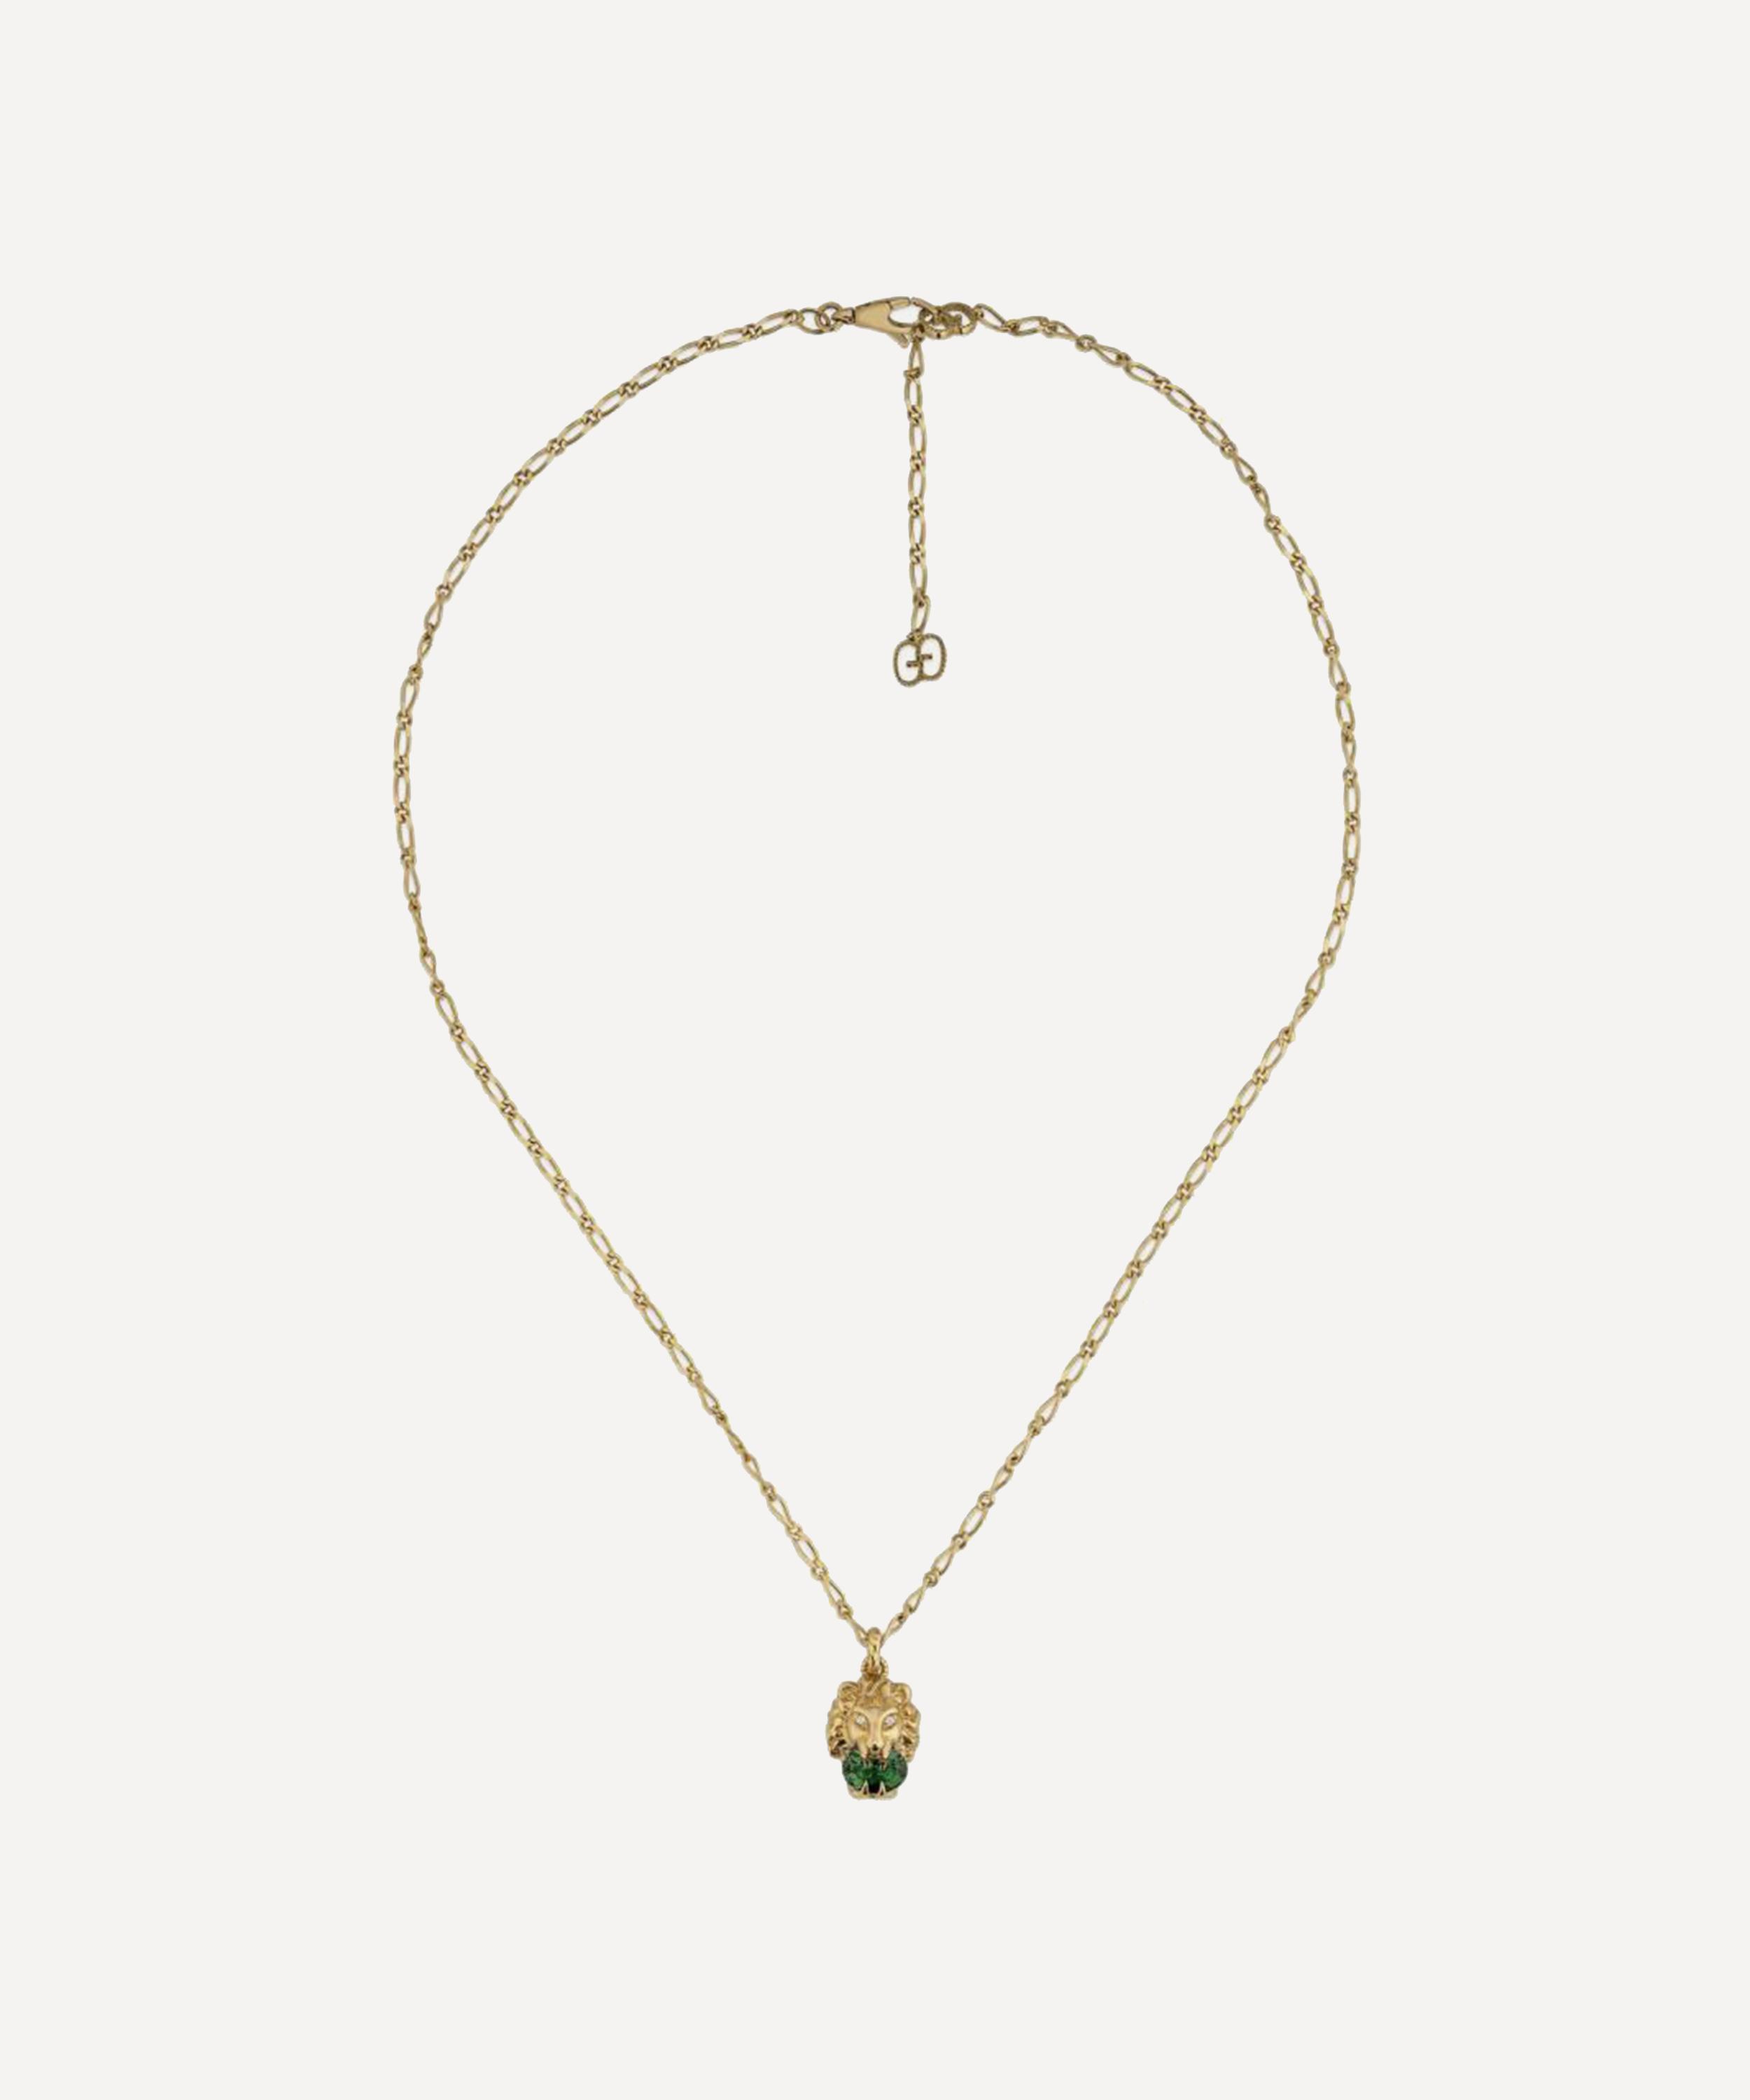 GUCCI GOLD CHROME DIOPSIDE AND DIAMOND LION HEAD PENDANT NECKLACE